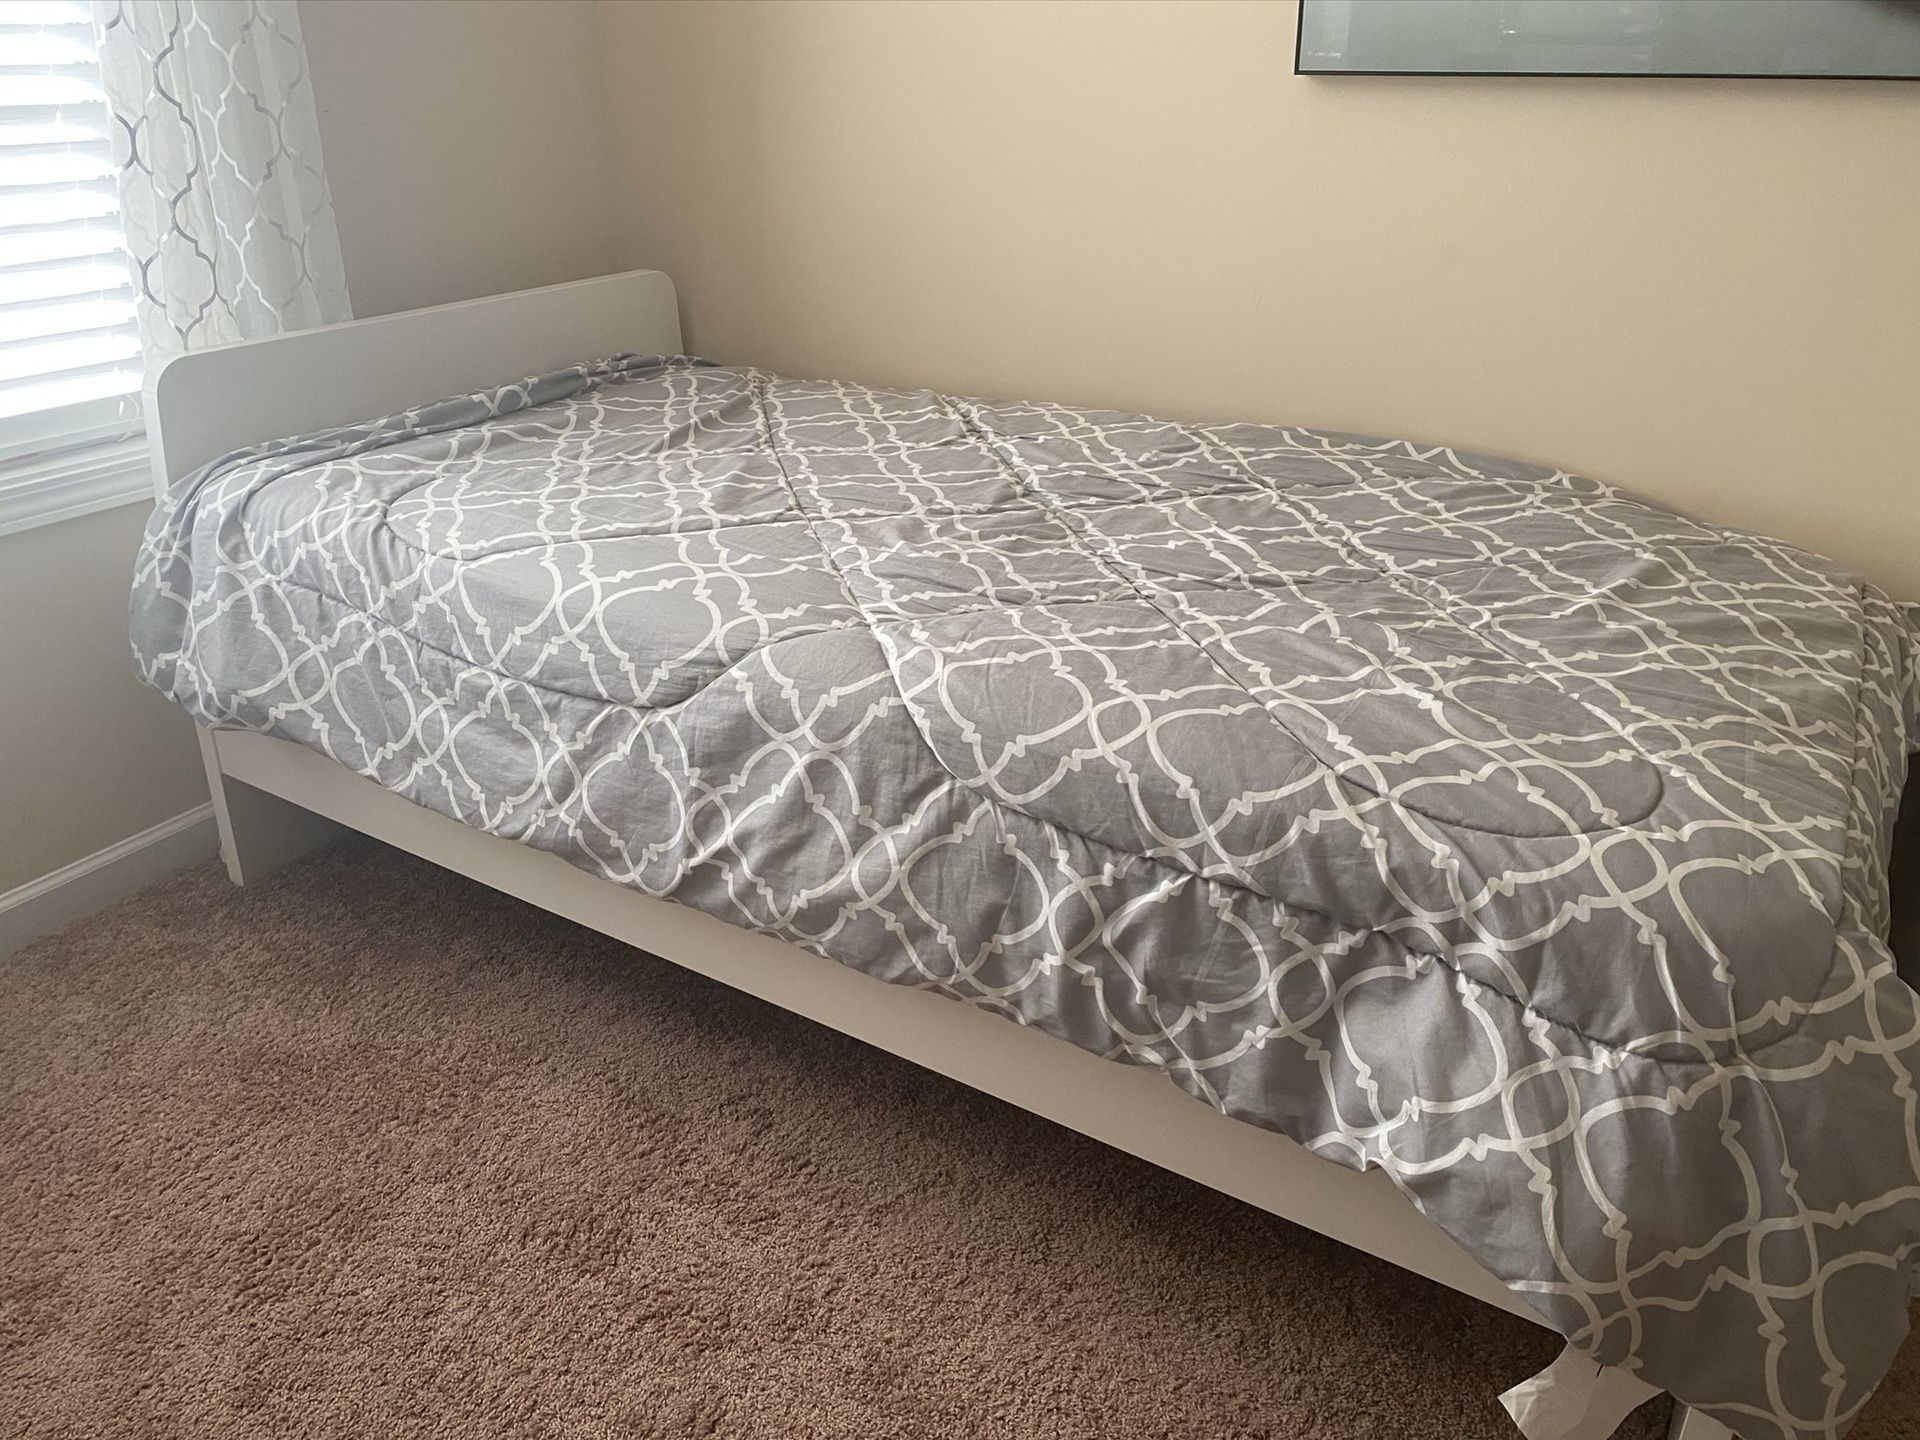 Twin size bed with mattress - IKEA